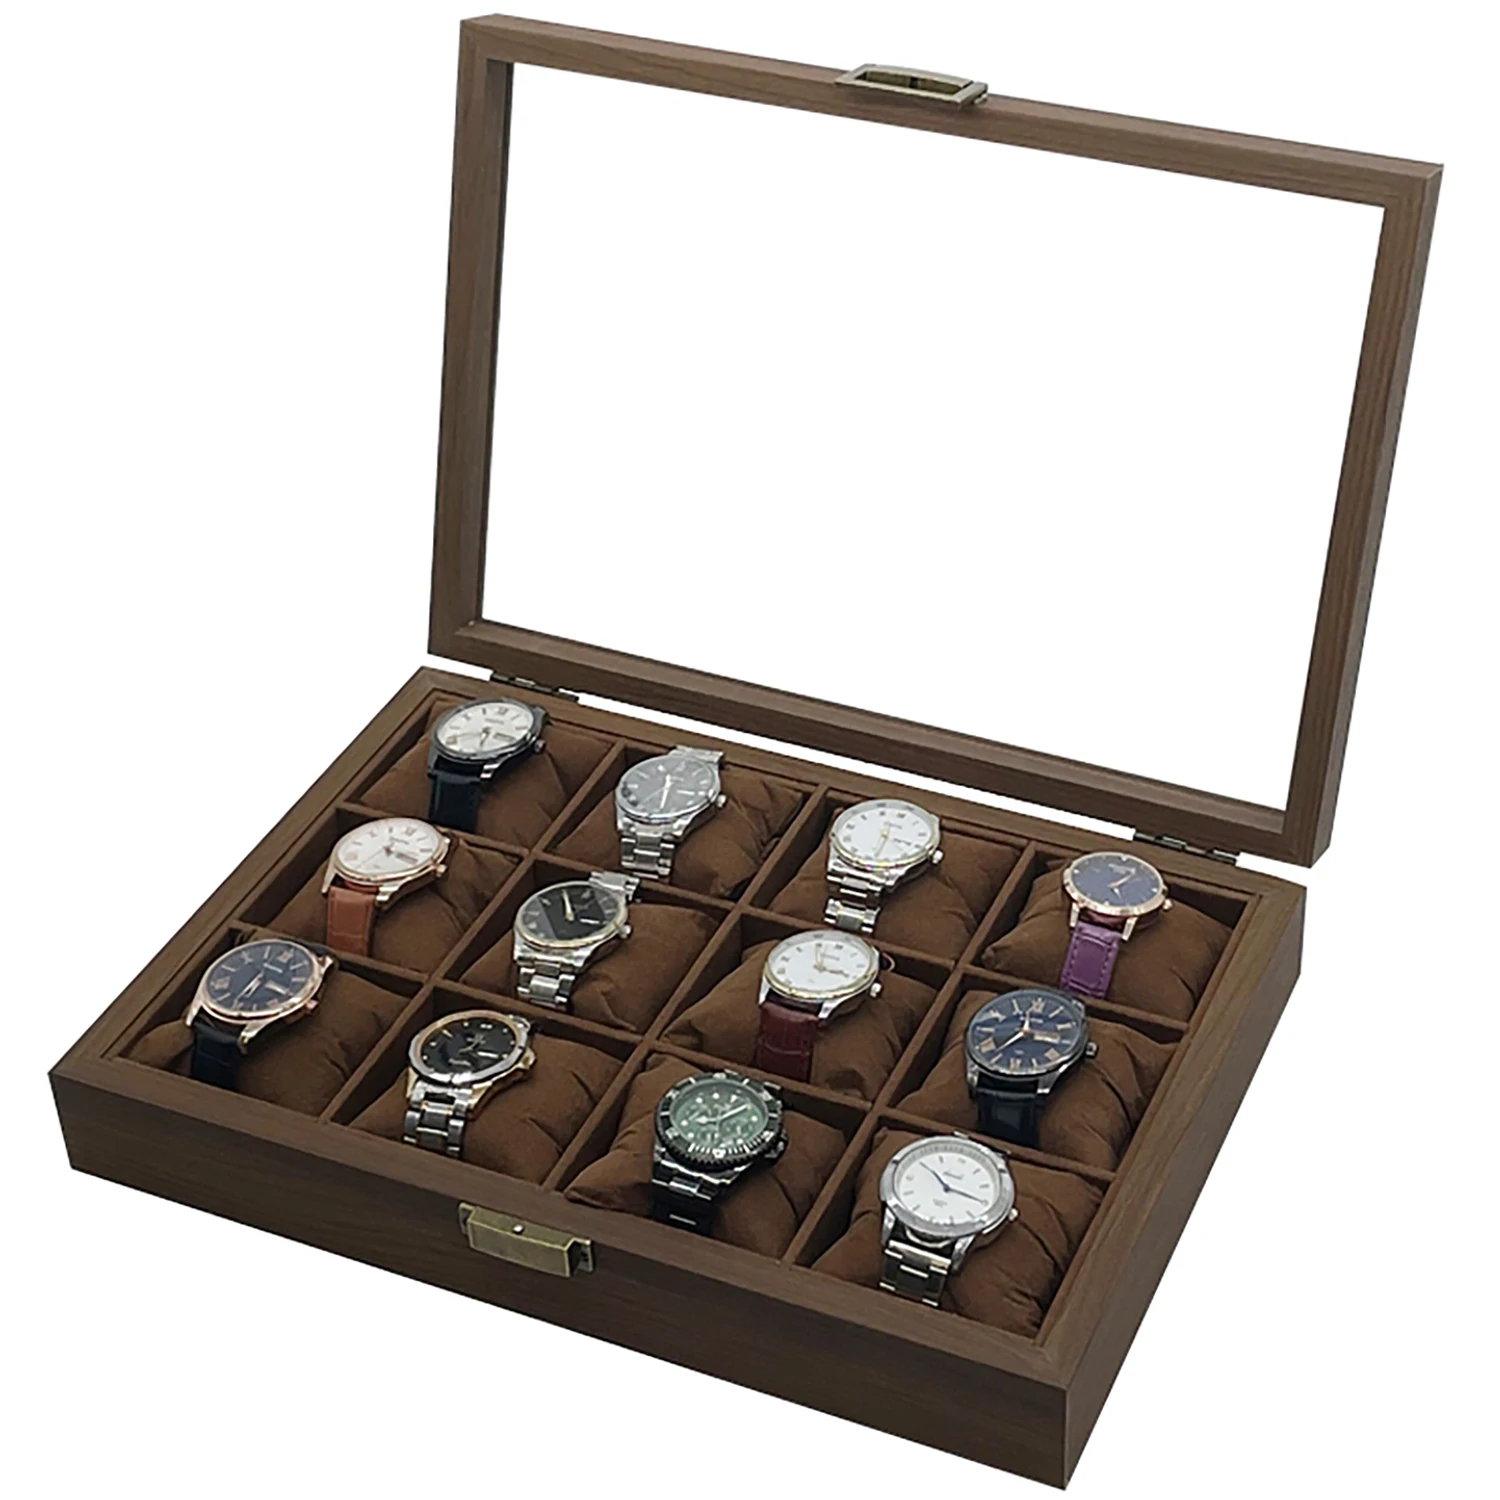 

12 Slot Men's Premium Watch Box, Watch Display Box, Glass Top,Leather Display Storage Collection Organizer with Removable Pillow